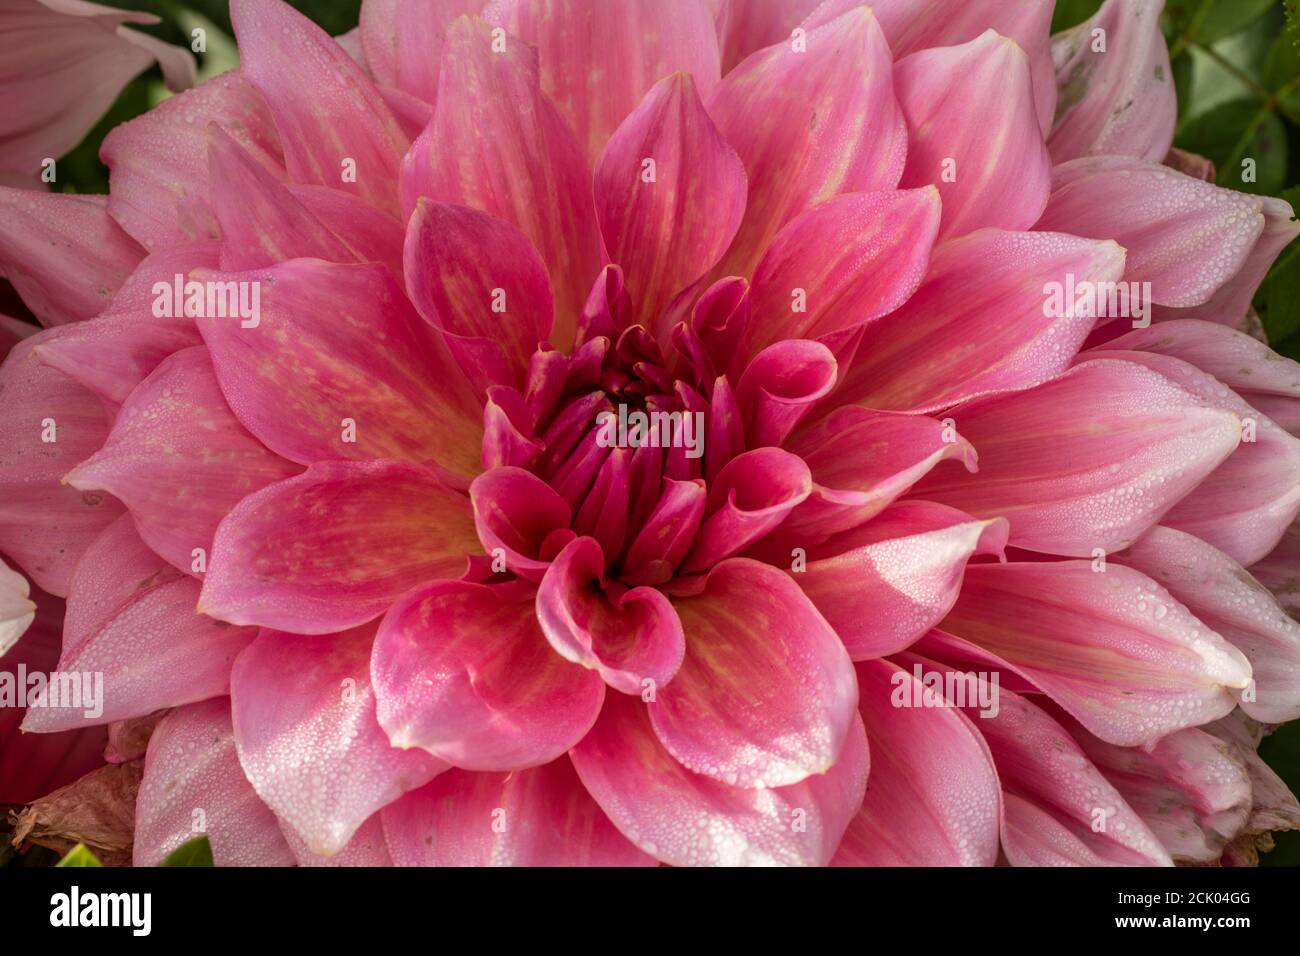 Patterns in nature, close-up natural flower portrait of pink Dahlia Stock  Photo - Alamy